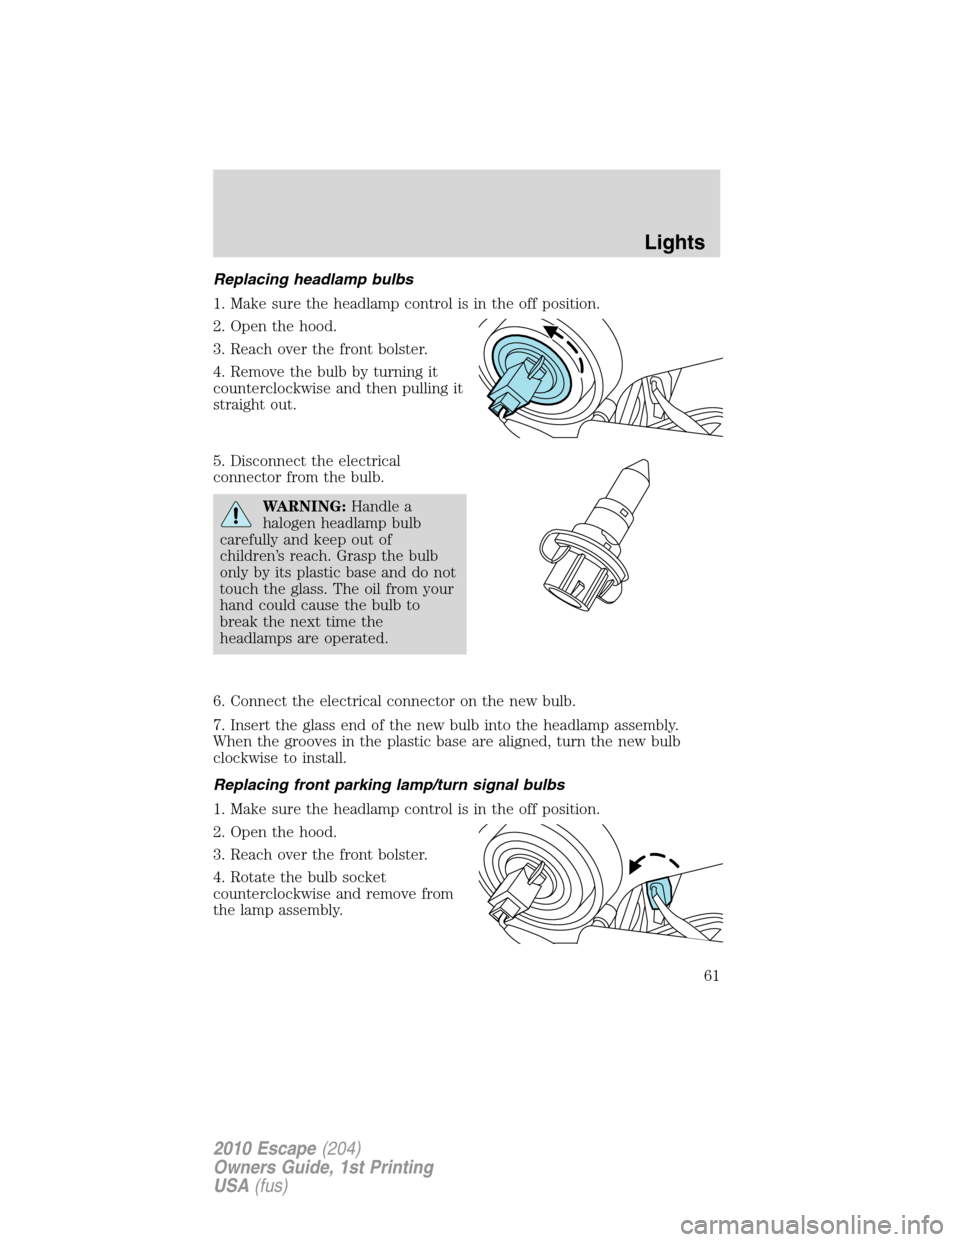 FORD ESCAPE 2010 2.G Owners Manual Replacing headlamp bulbs
1. Make sure the headlamp control is in the off position.
2. Open the hood.
3. Reach over the front bolster.
4. Remove the bulb by turning it
counterclockwise and then pulling